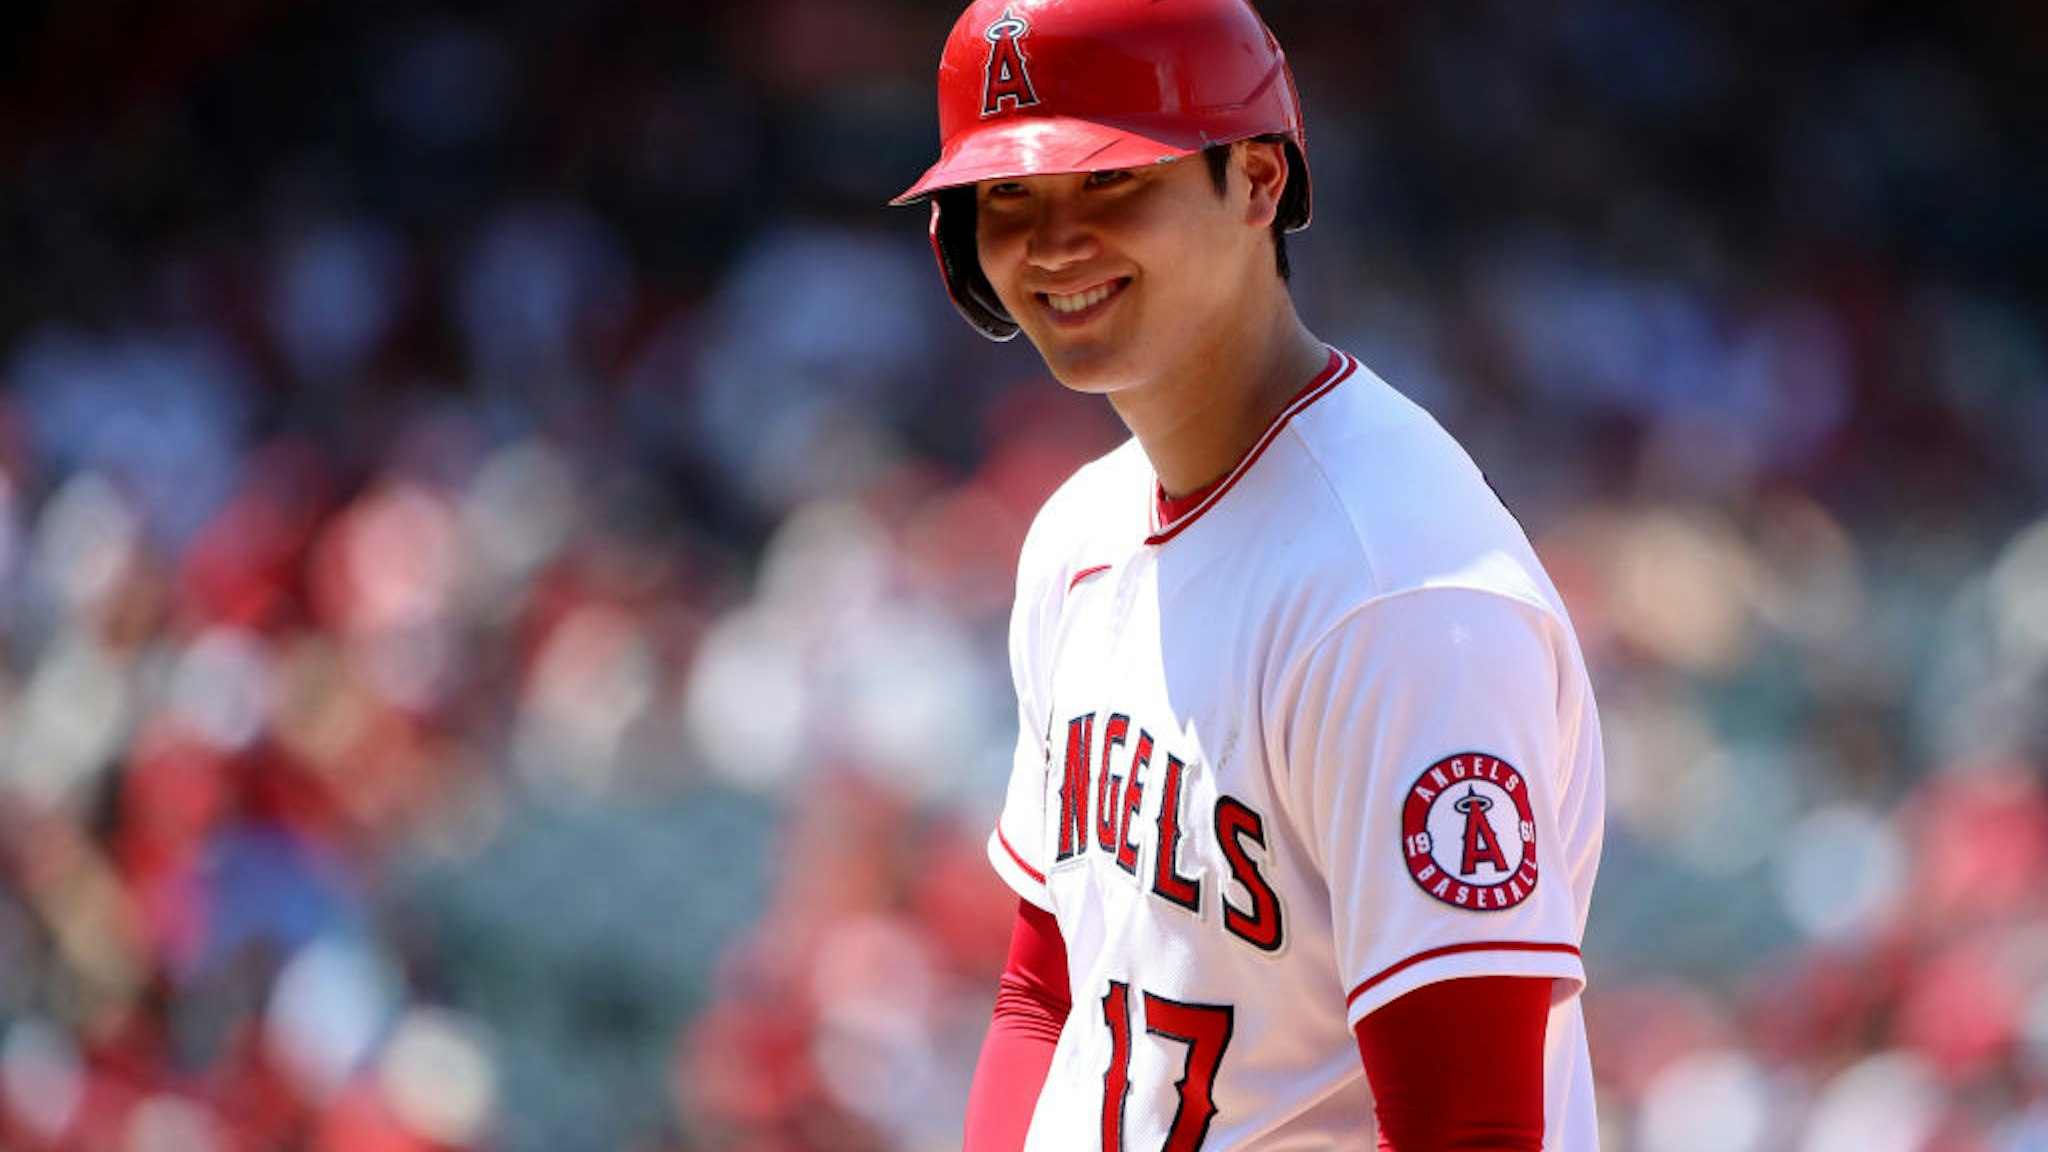 ANAHEIM, CALIFORNIA - JULY 18: Shohei Ohtani #17 of the Los Angeles Angels looks on from first base during the fifth inning against the Seattle Mariners at Angel Stadium of Anaheim on July 18, 2021 in Anaheim, California. (Photo by Katelyn Mulcahy/Getty Images)